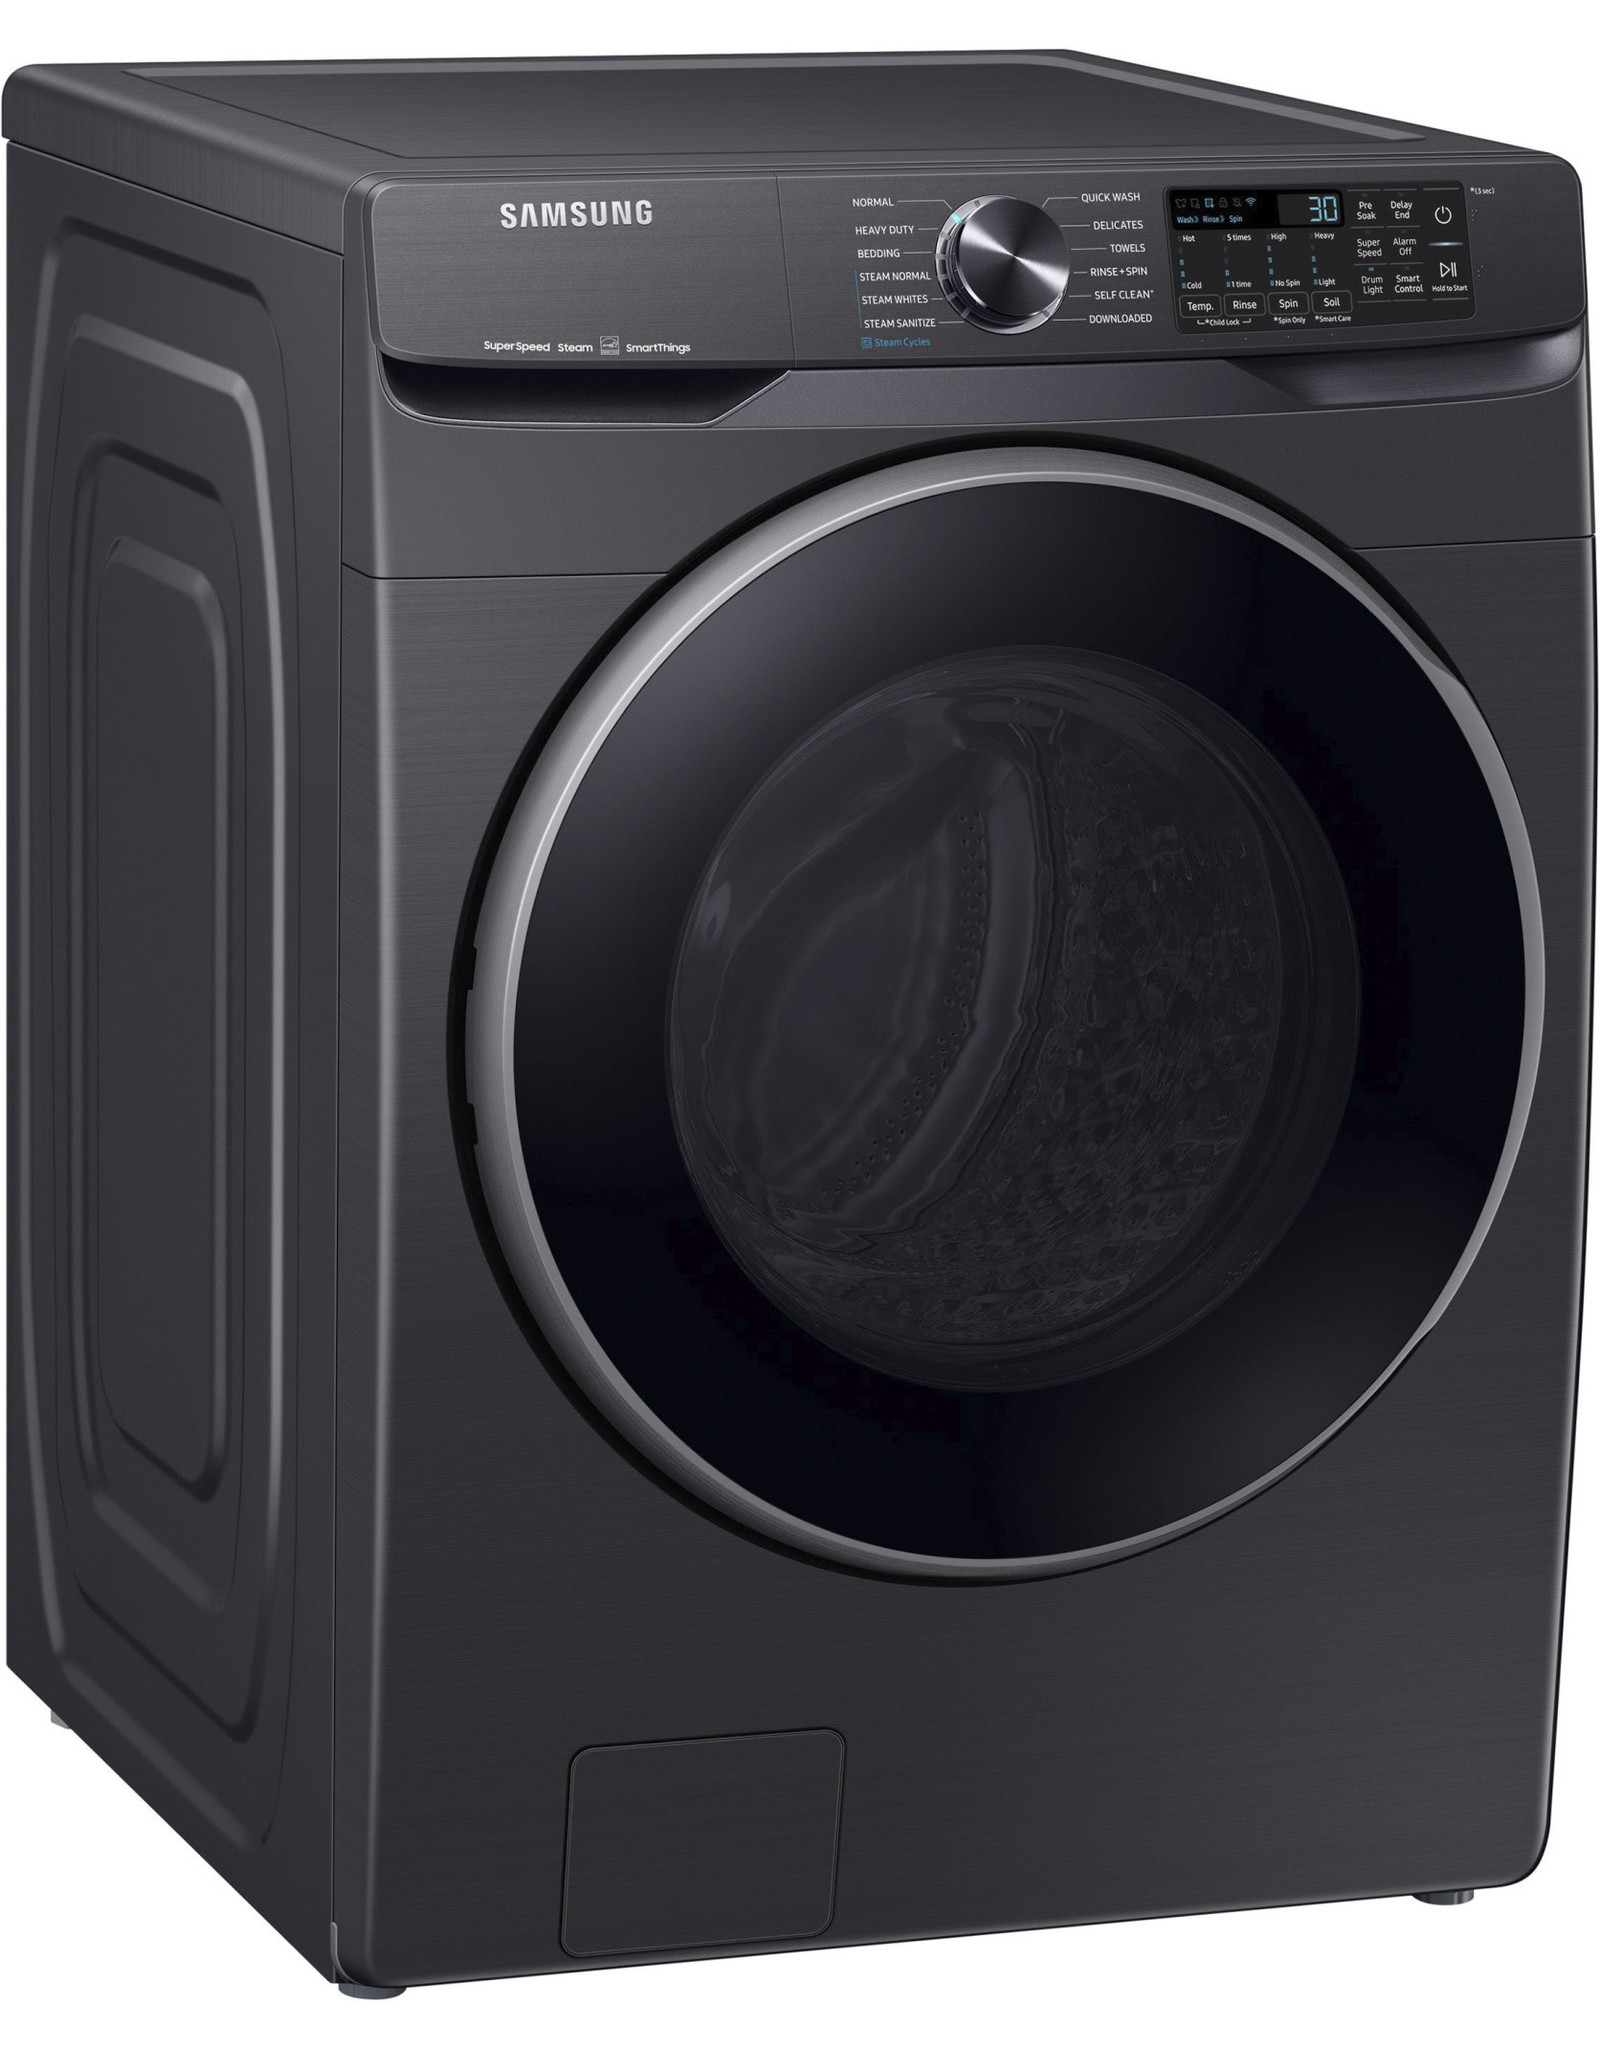 SAMSUNG ( WF50A8500AV 5.0 cu. ft. Extra-Large Capacity Smart Front Load Washer with Super Speed Wash in Brushed Black